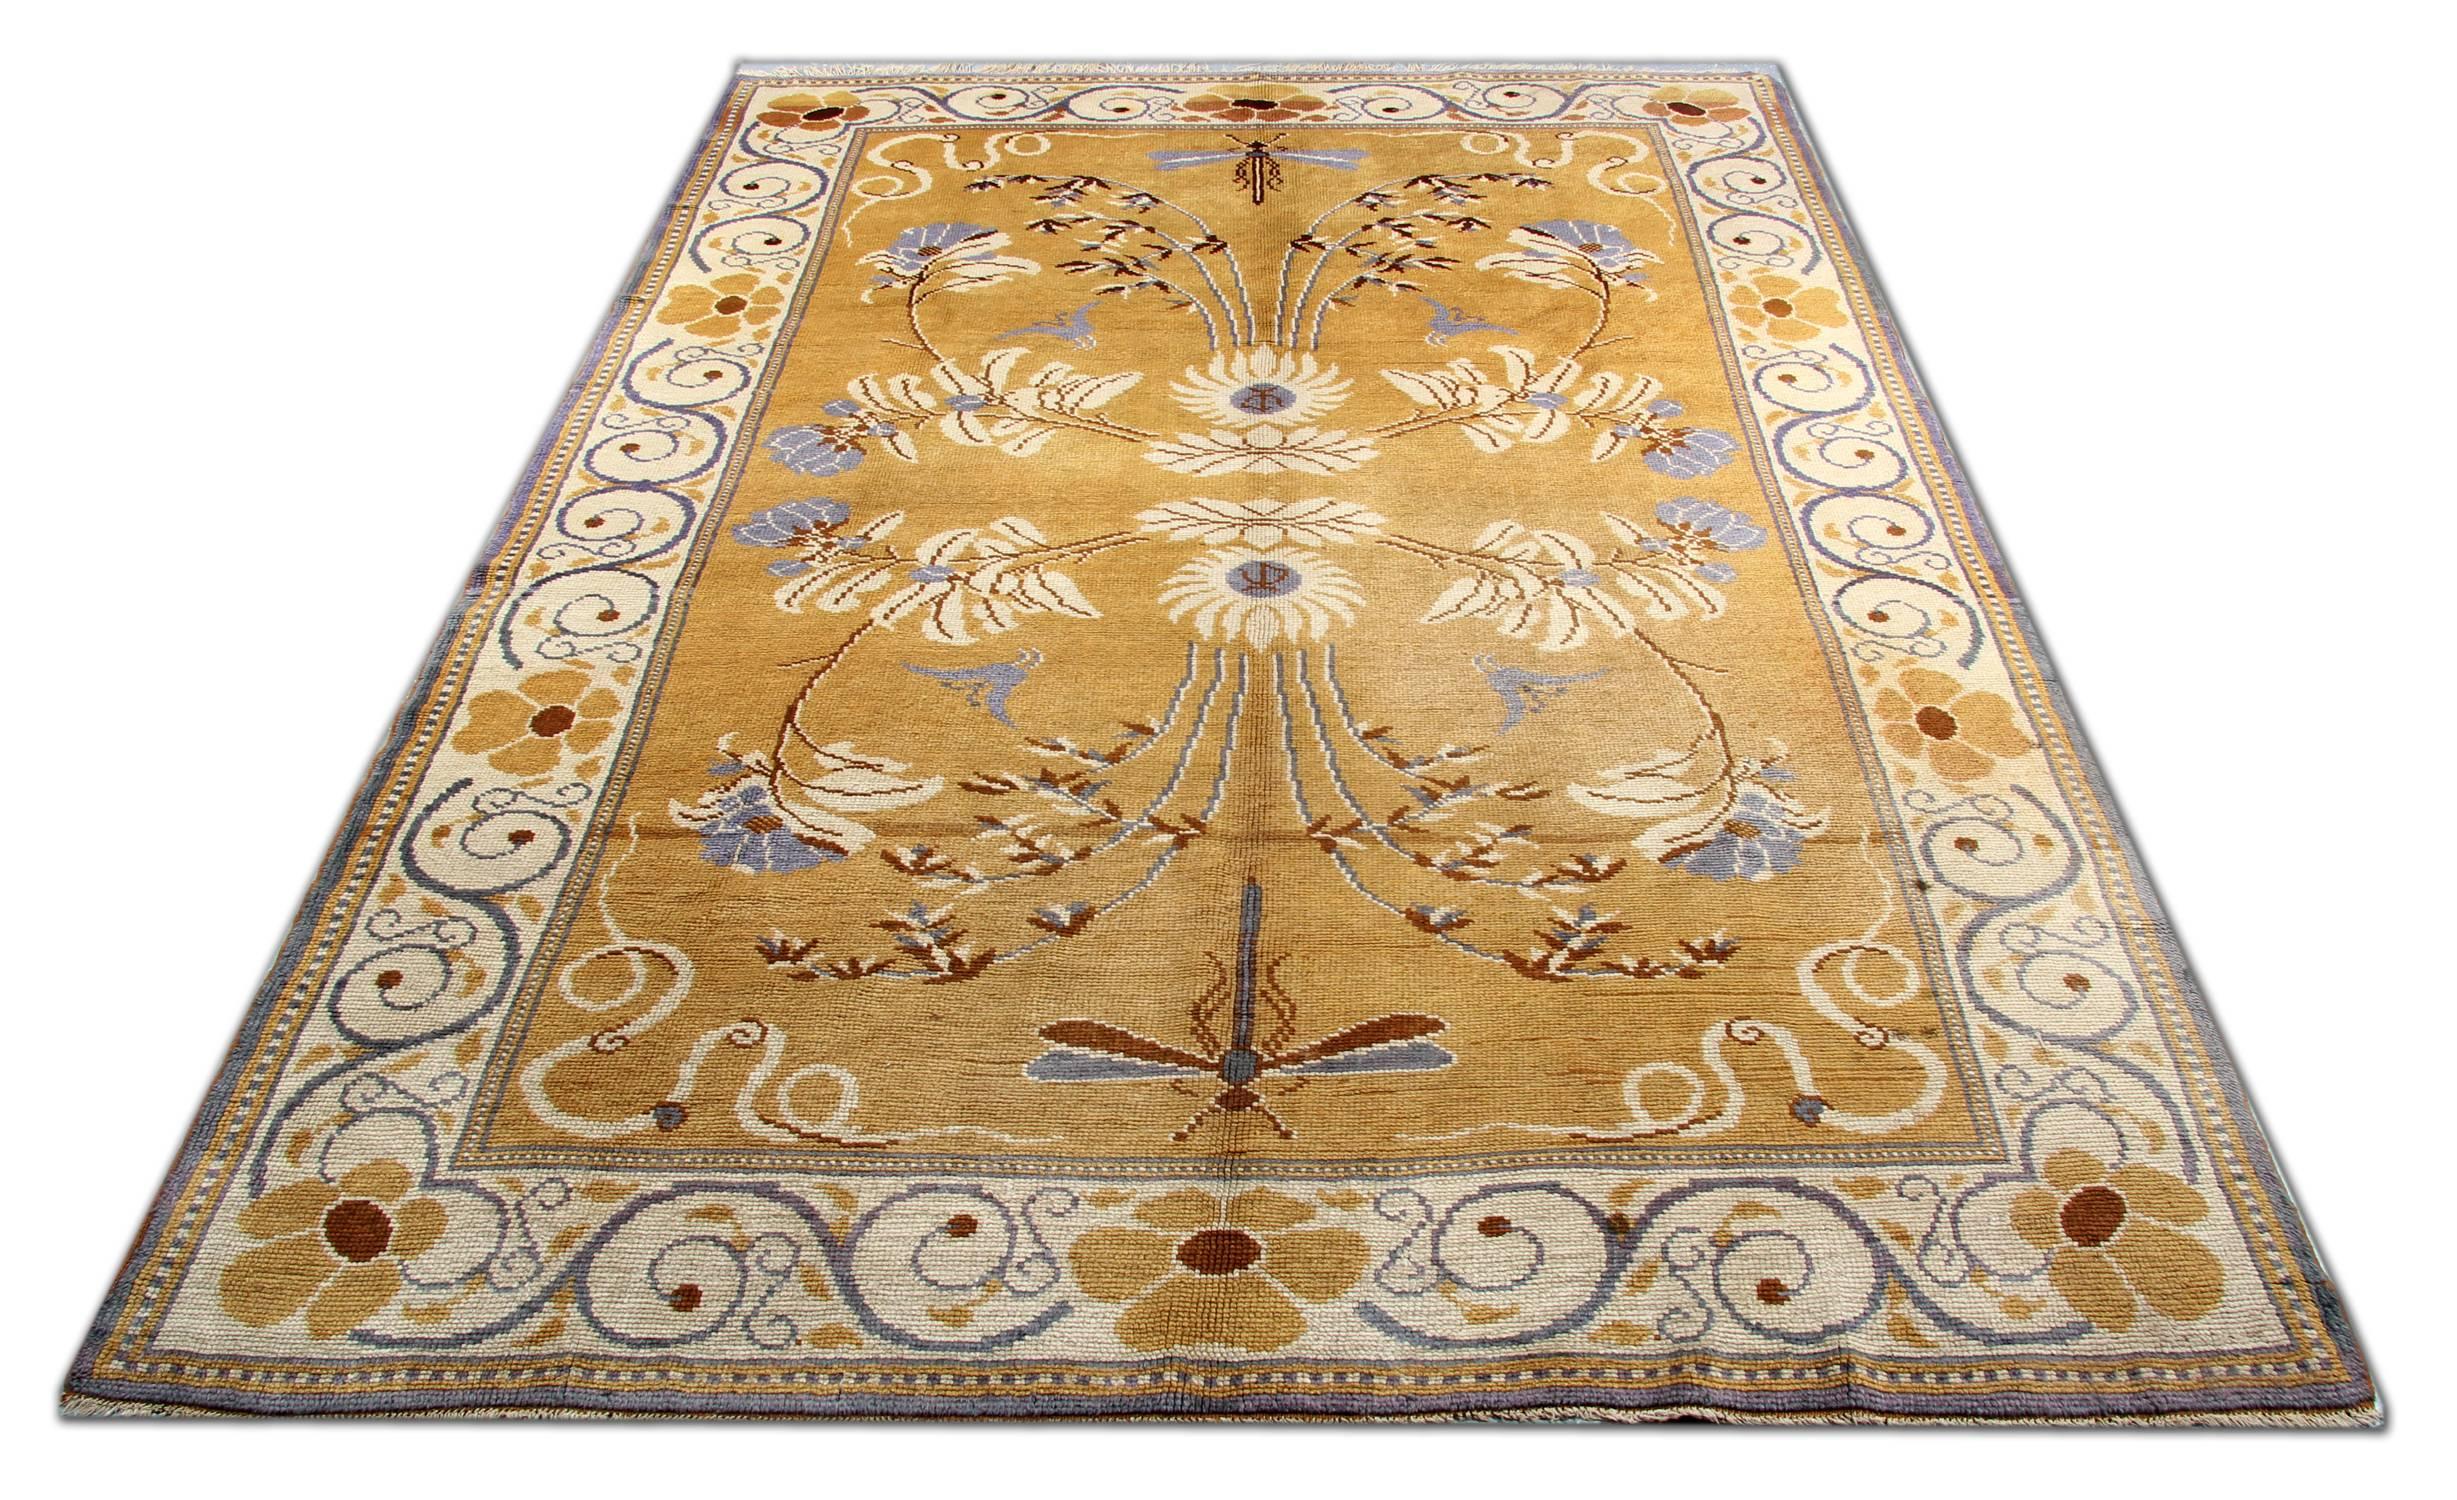 The handmade carpet Art & Crafts movement grew out of the wool rugs design revolution spawned by English artist like William Morris. In Ireland, this movement gradually focuses on native Celtic traditions from the Middle Ages and eventually